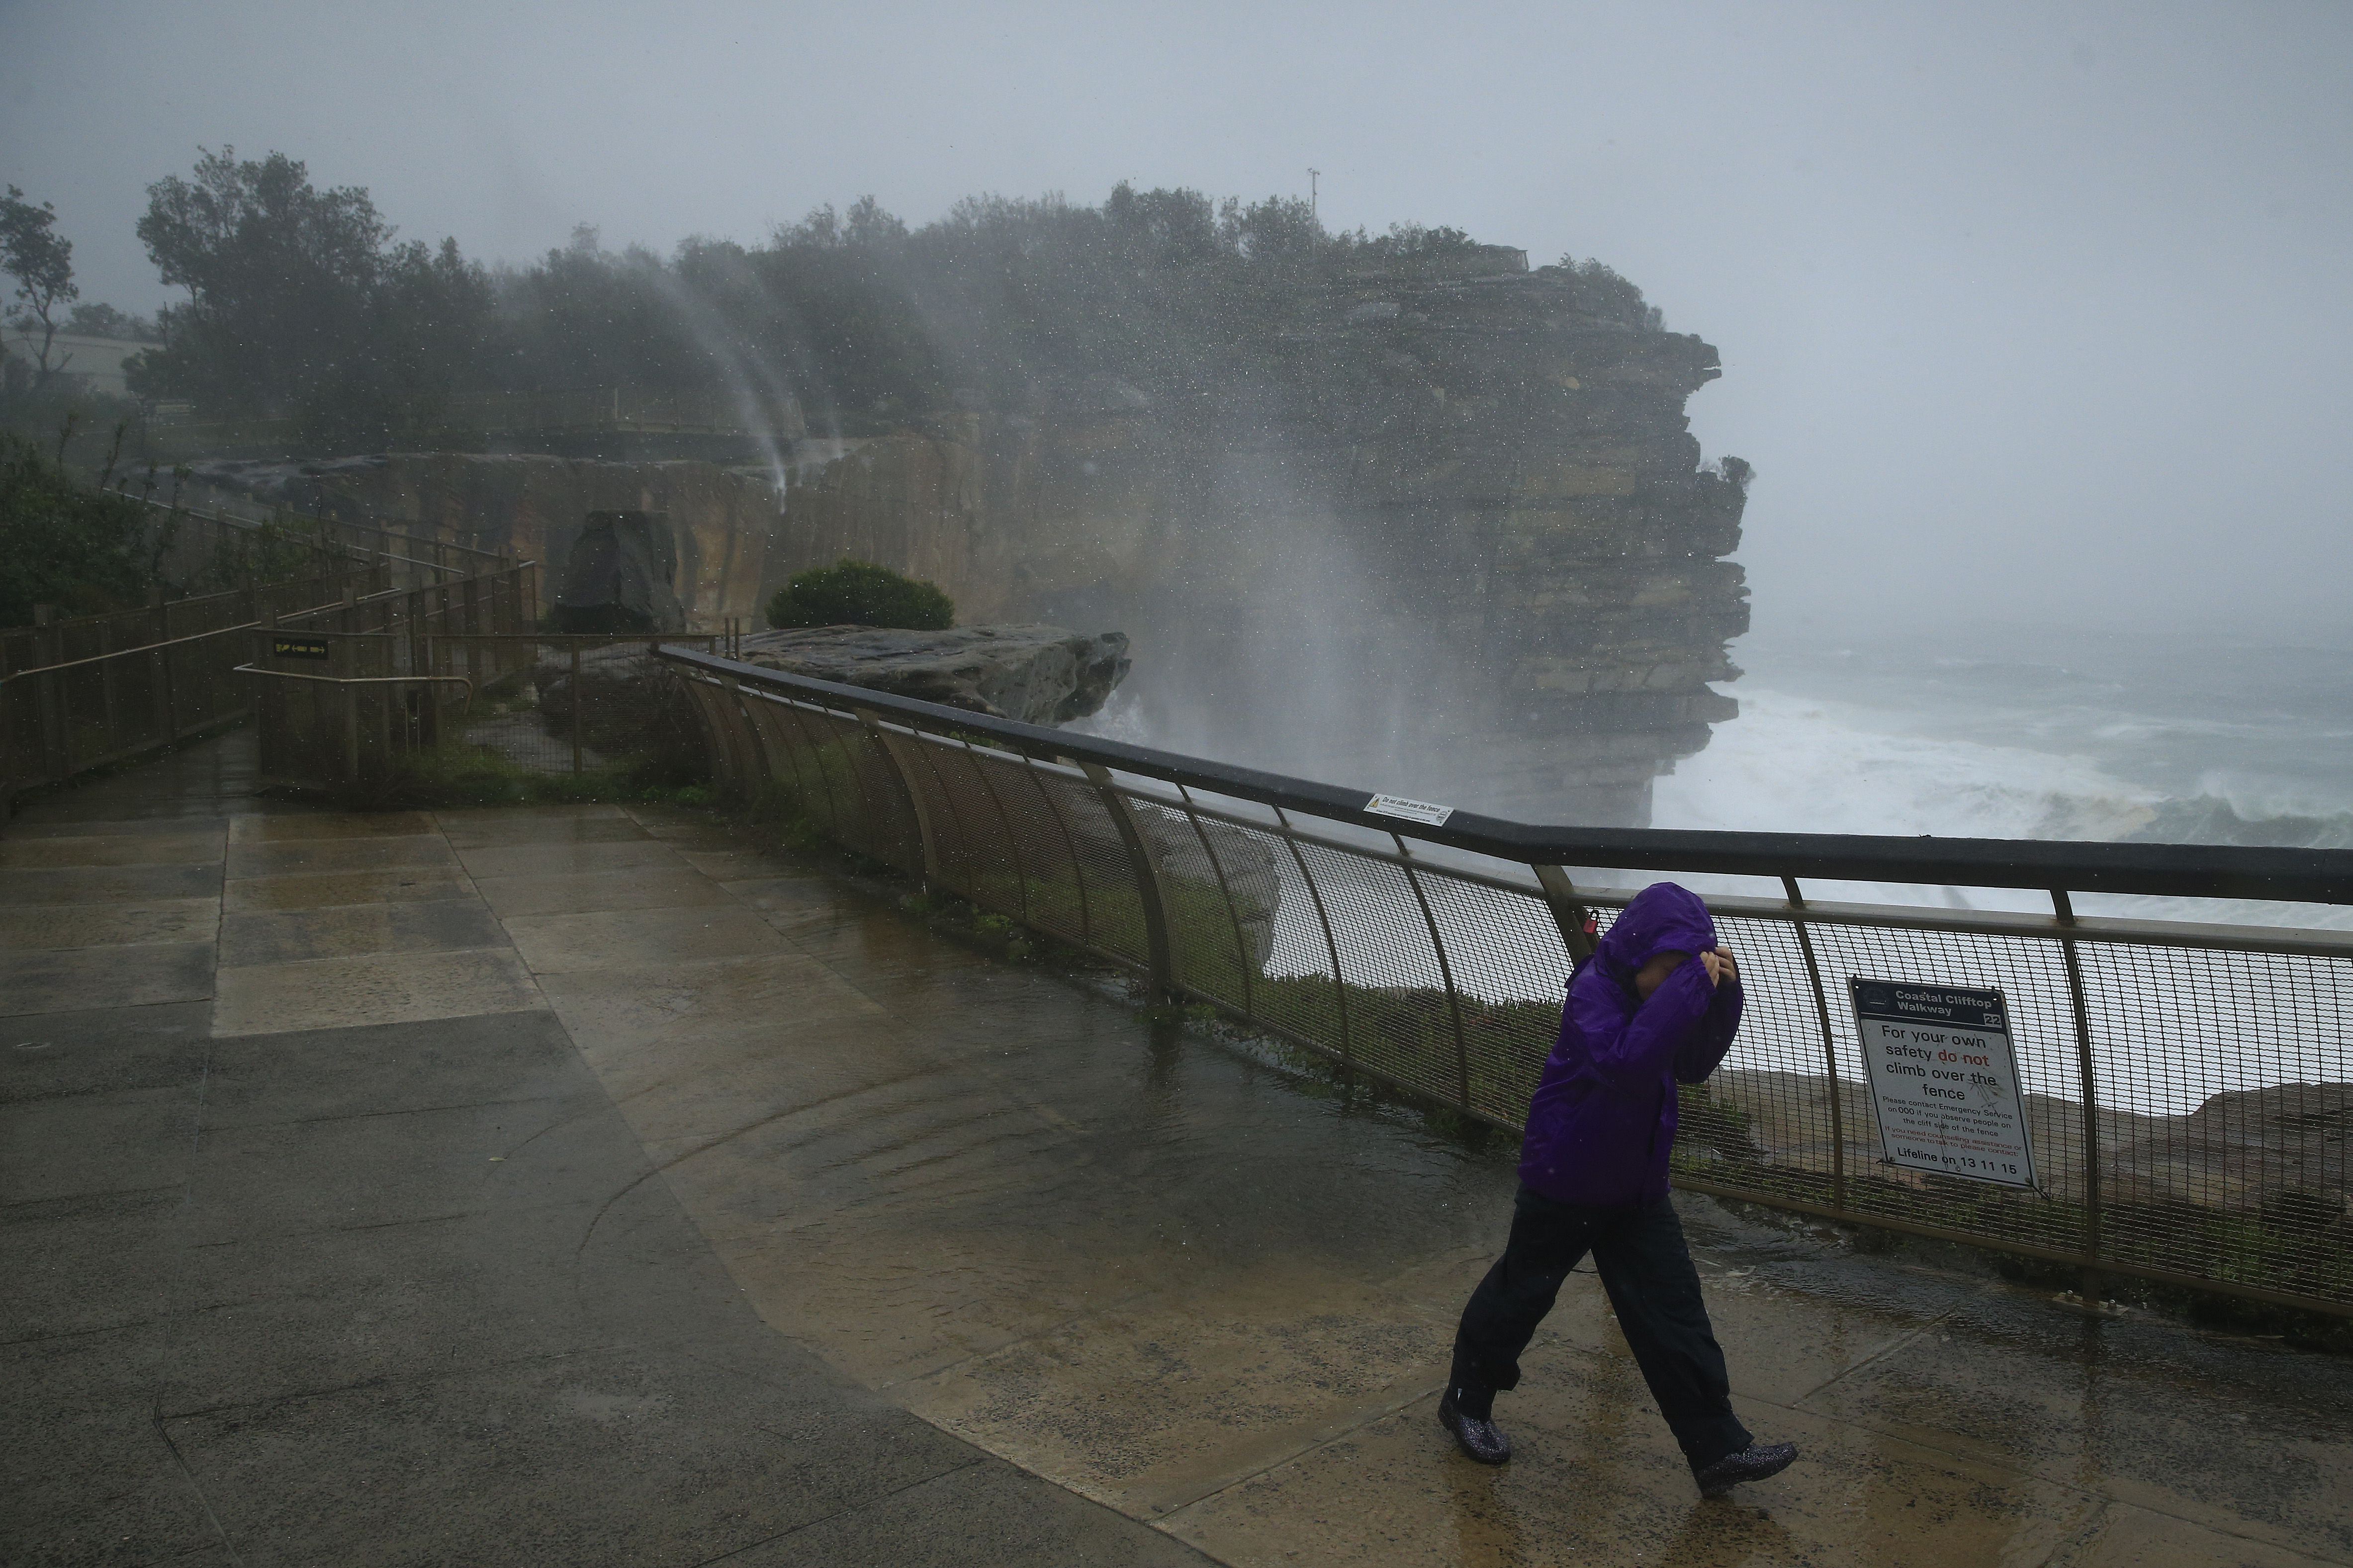 Water rises off the cliffs at Watsons Bay as a sightseer struggles in the wind on February 09, 2020 in Sydney